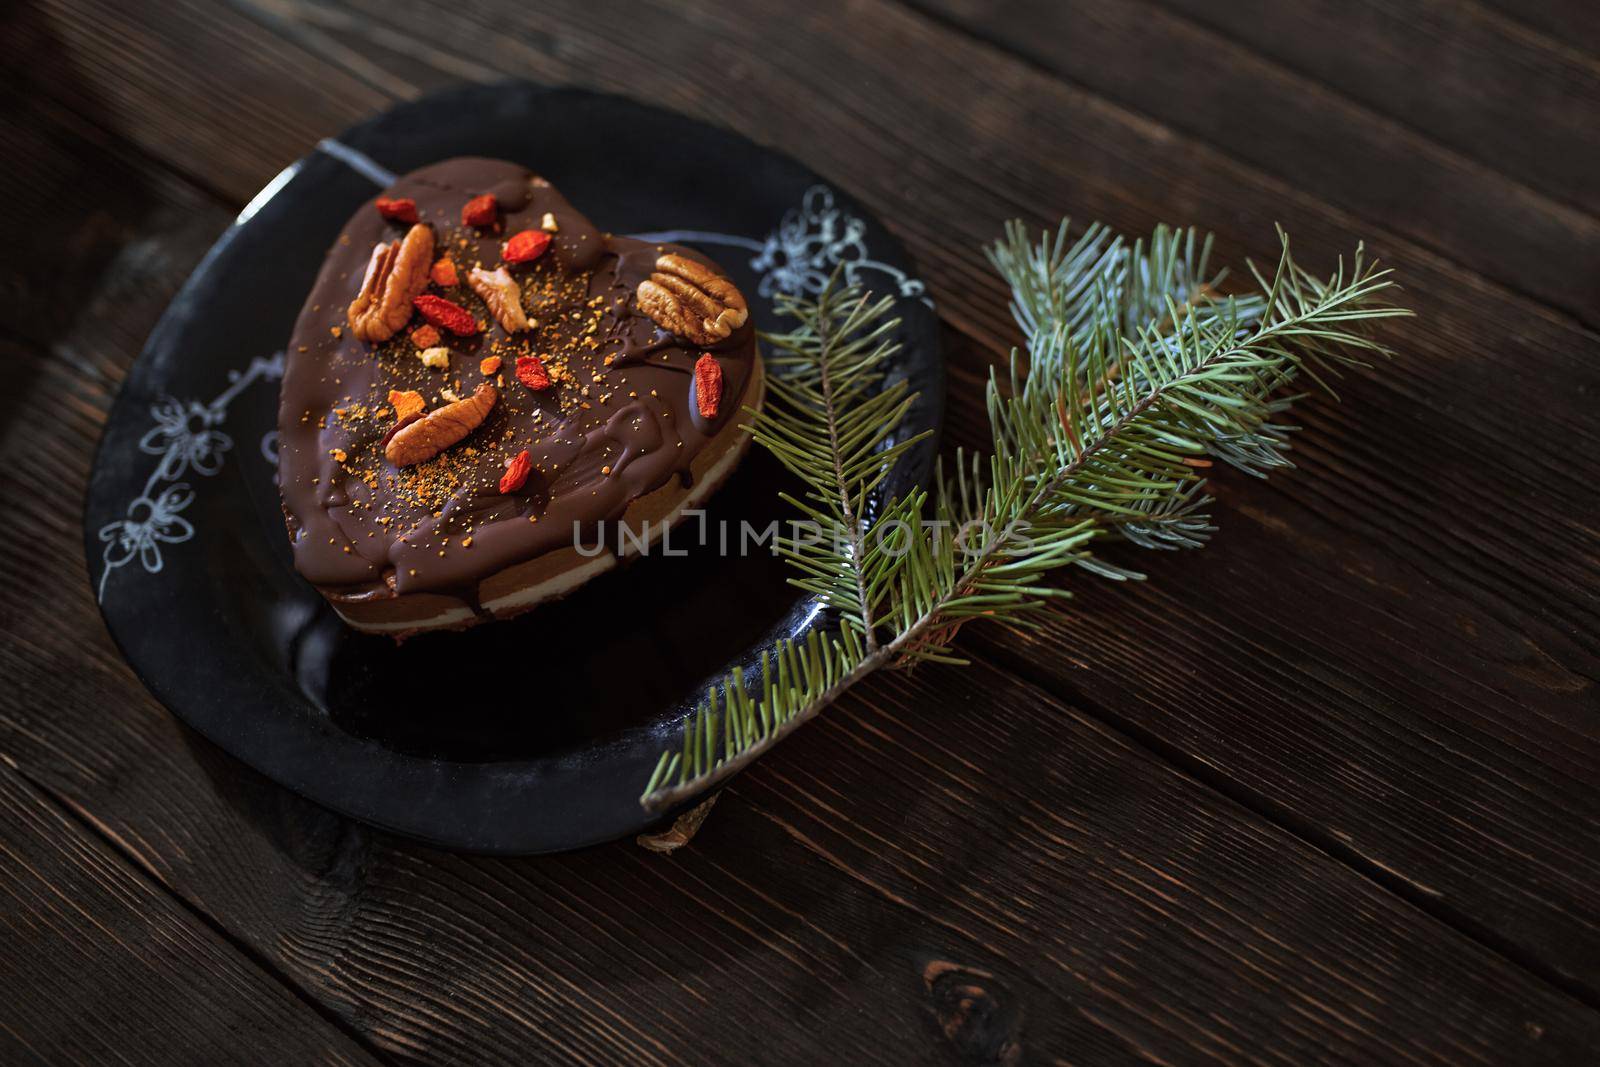 Gluten and dairy free chocolate cake with Christmas tree twig on a wooden table